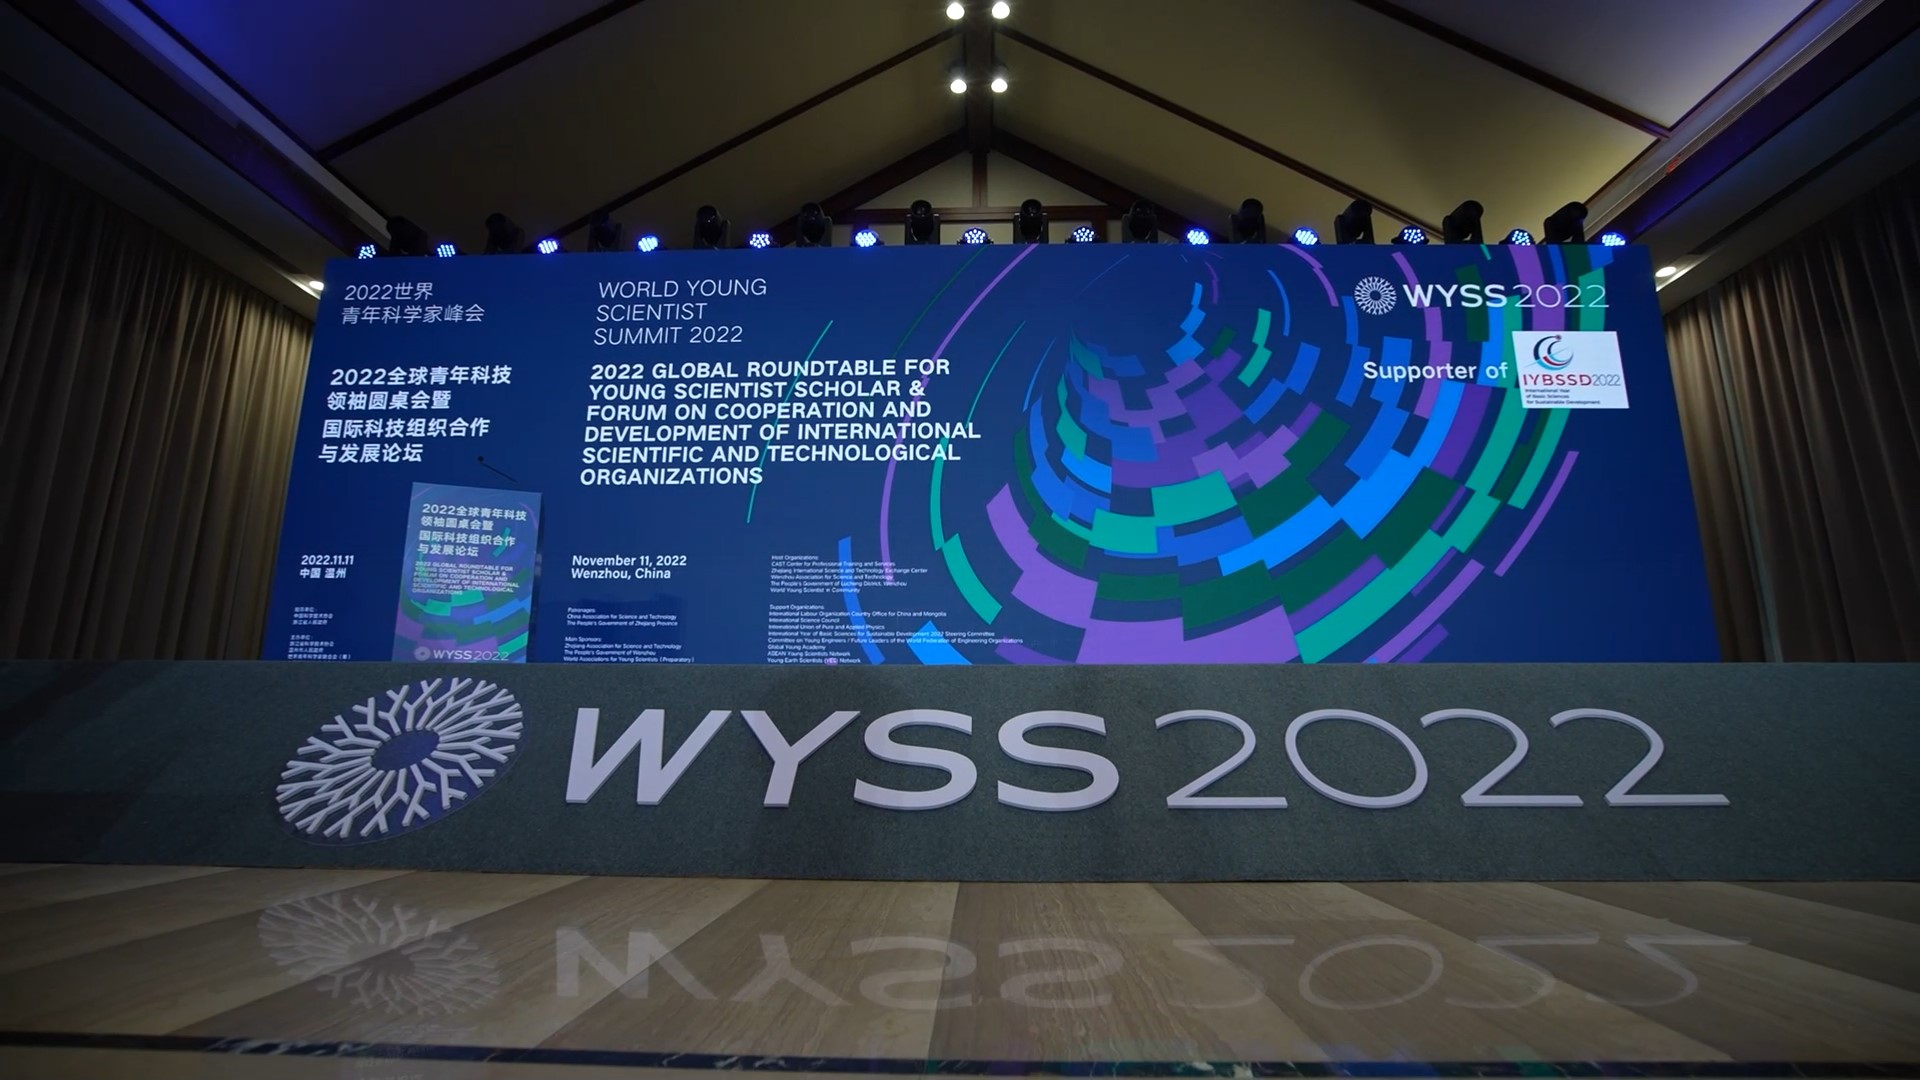 WYSS 2022-2022 Global Roundtable for Young Scientist Scholar & Forum on Cooperation and Development of International Scientific and Technological Organizations